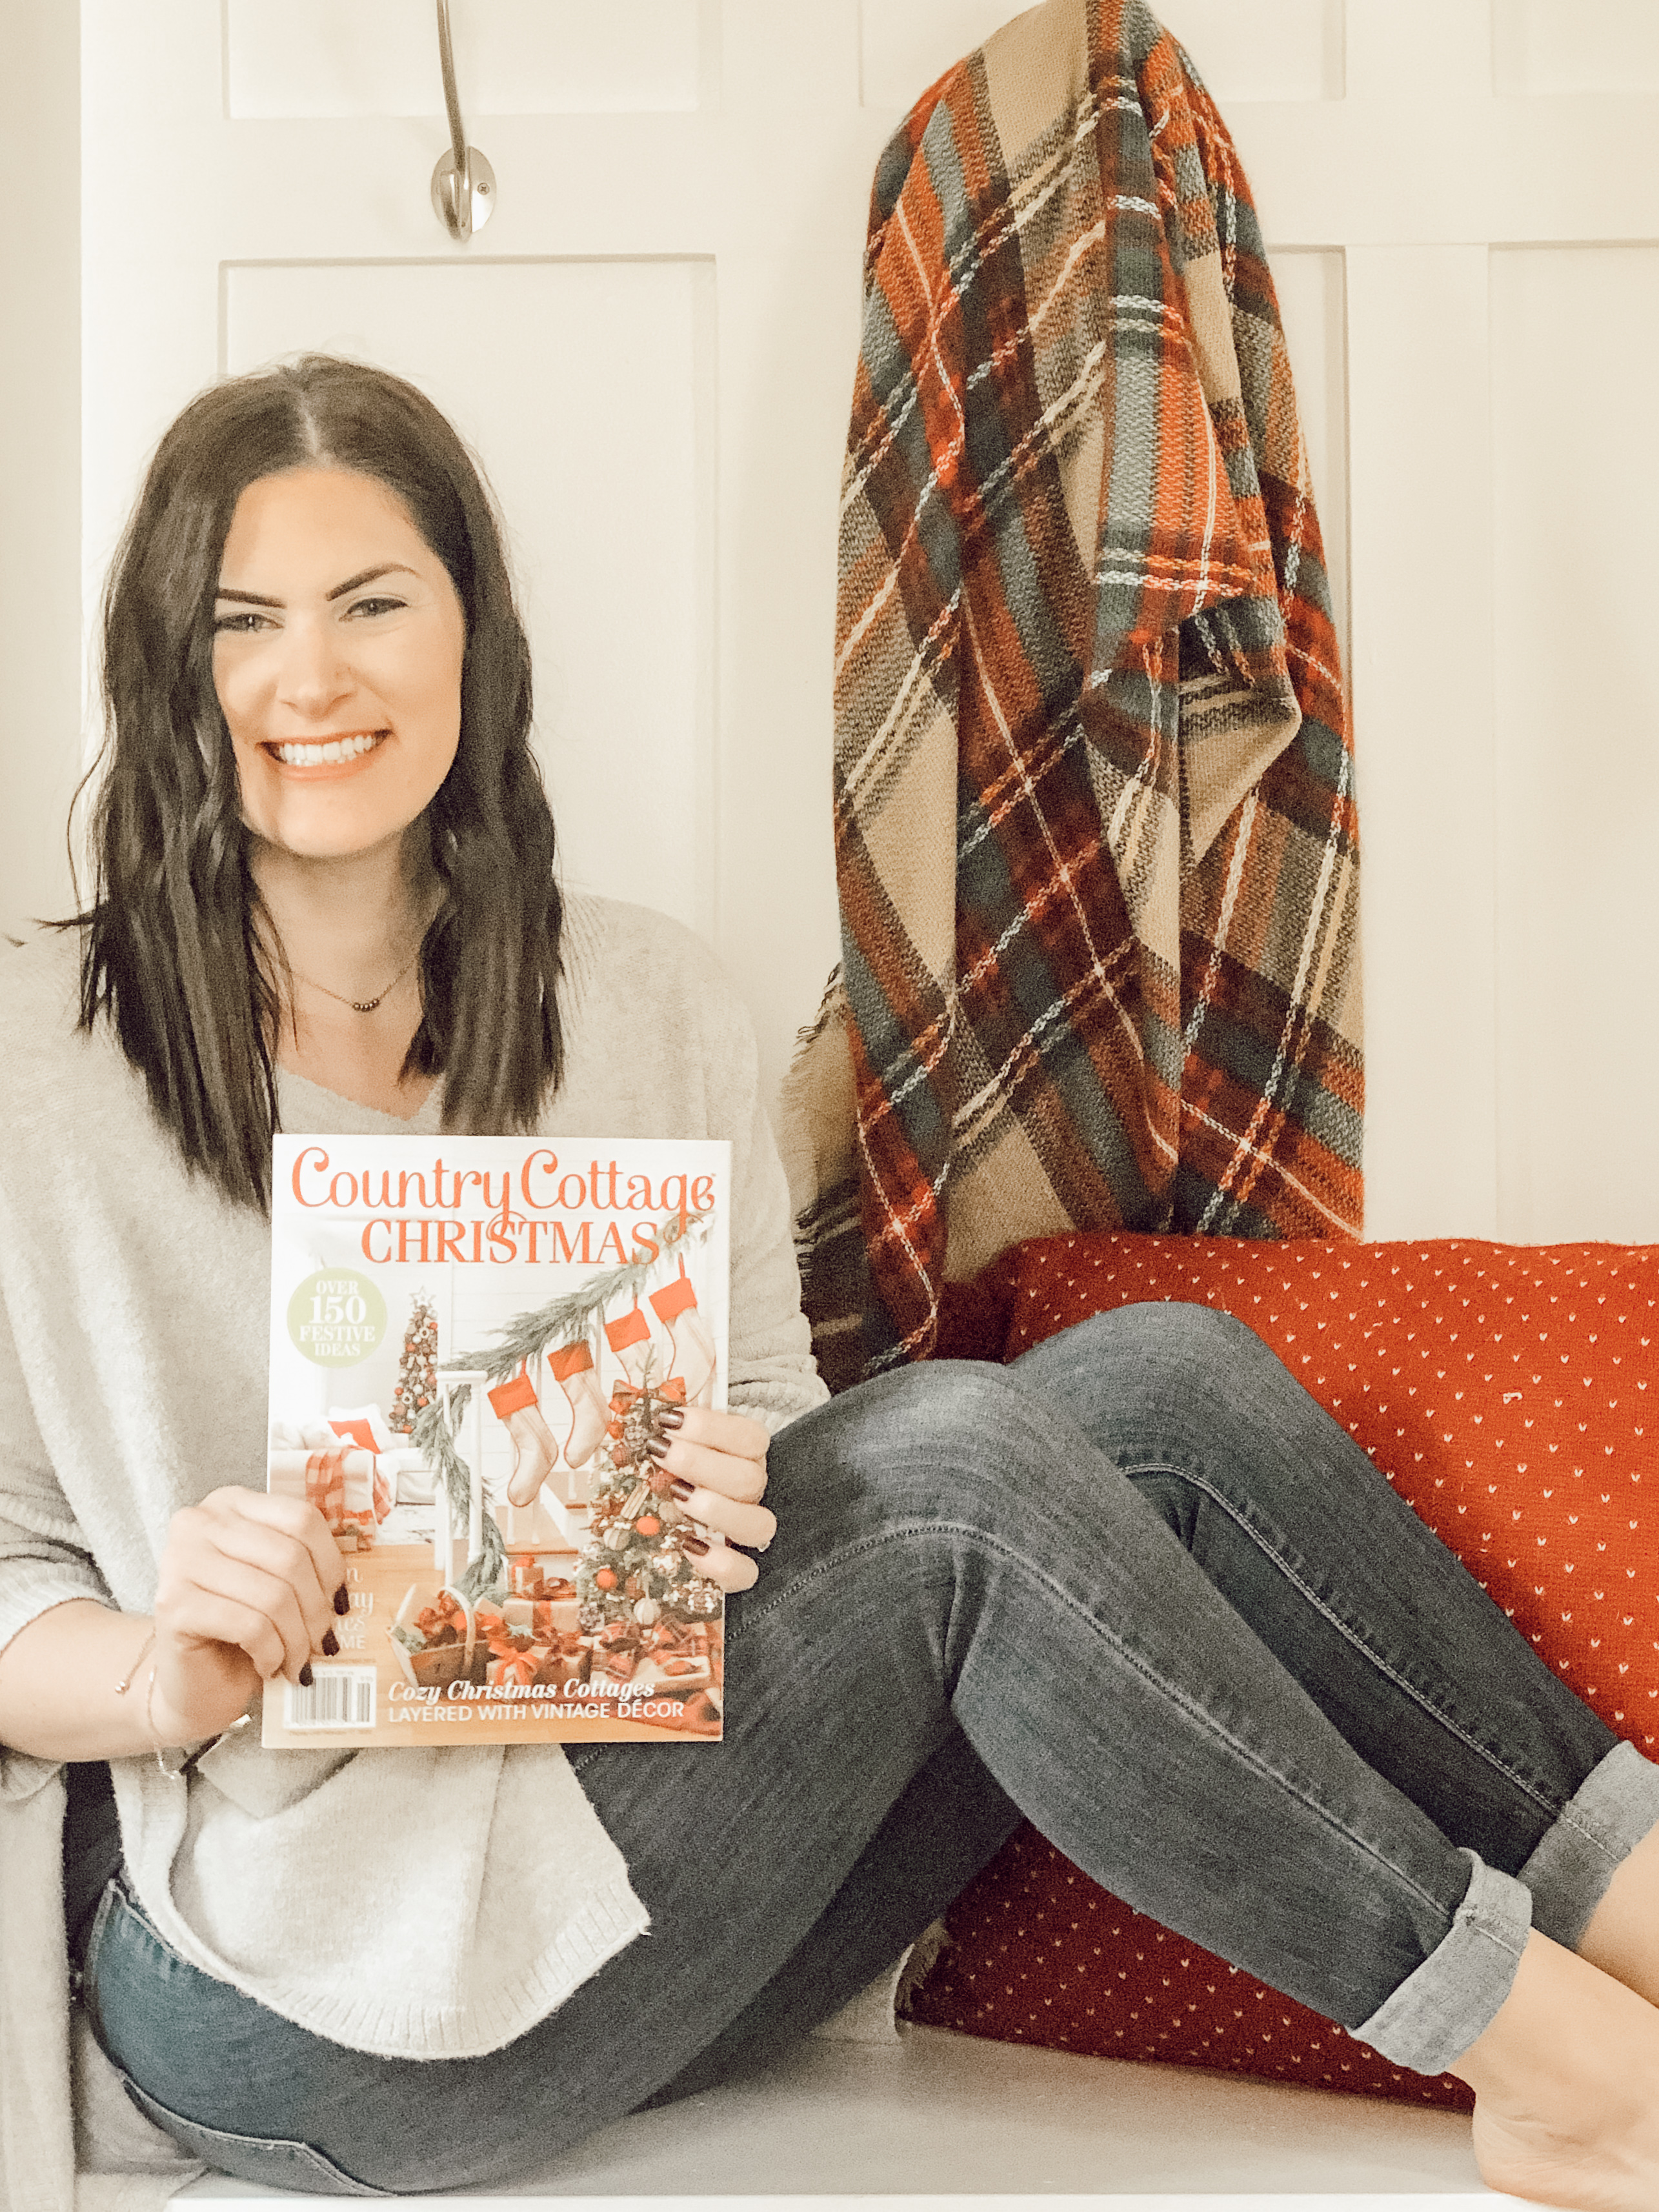 Check out my feature in Country Cottage Christmas!